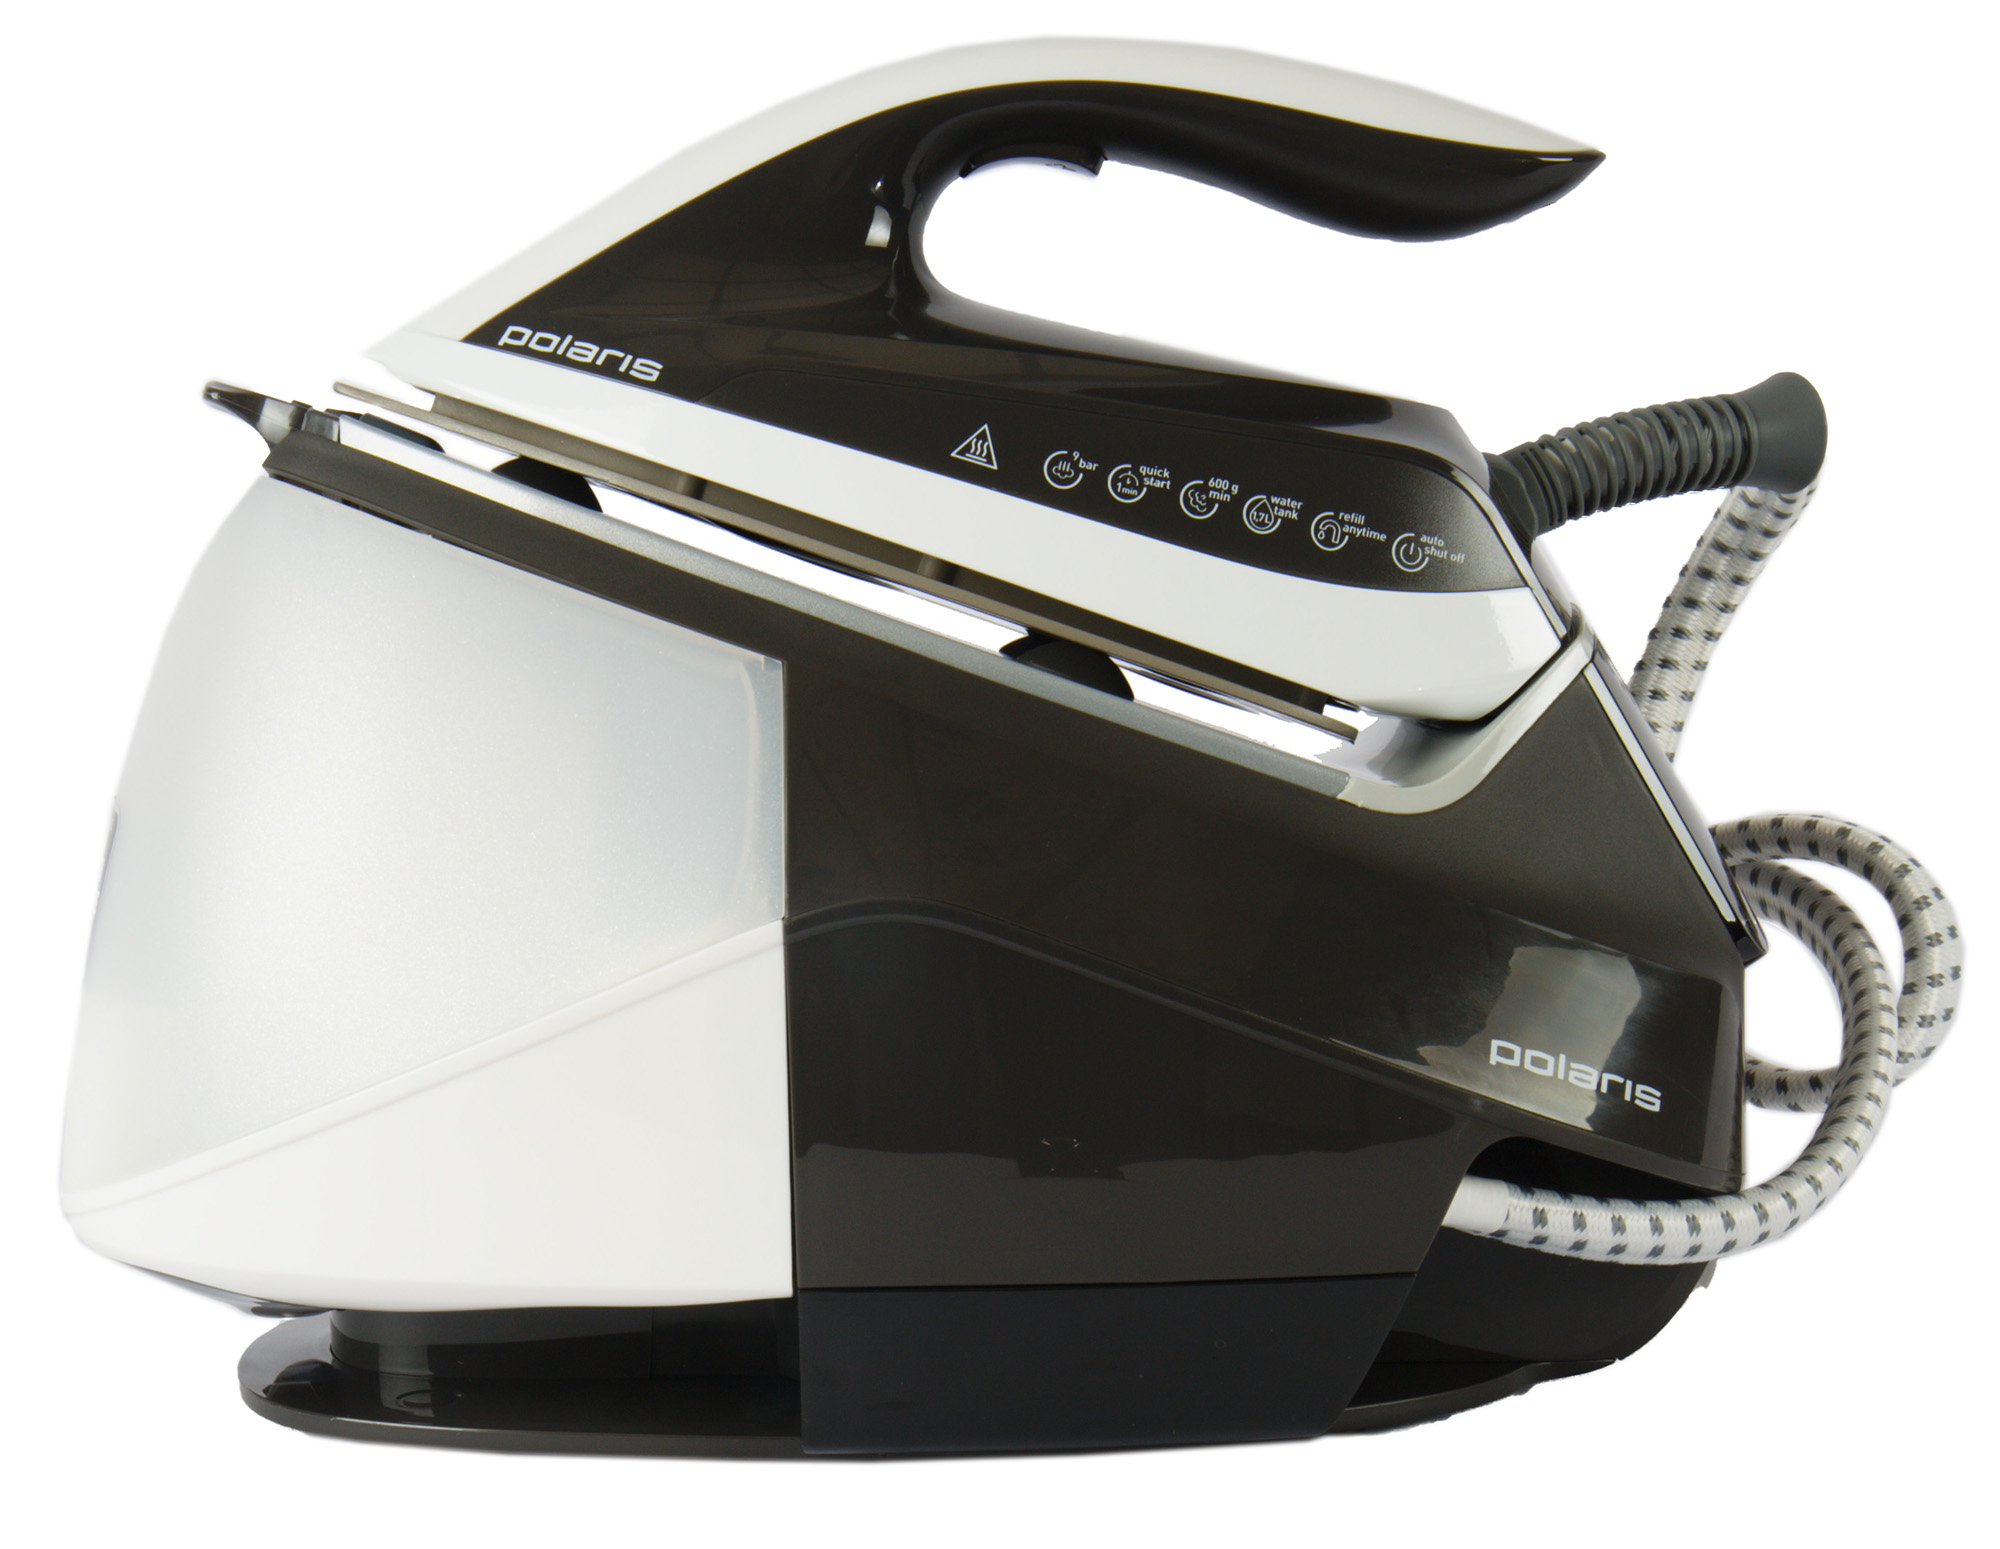 Steam generator irons review фото 90